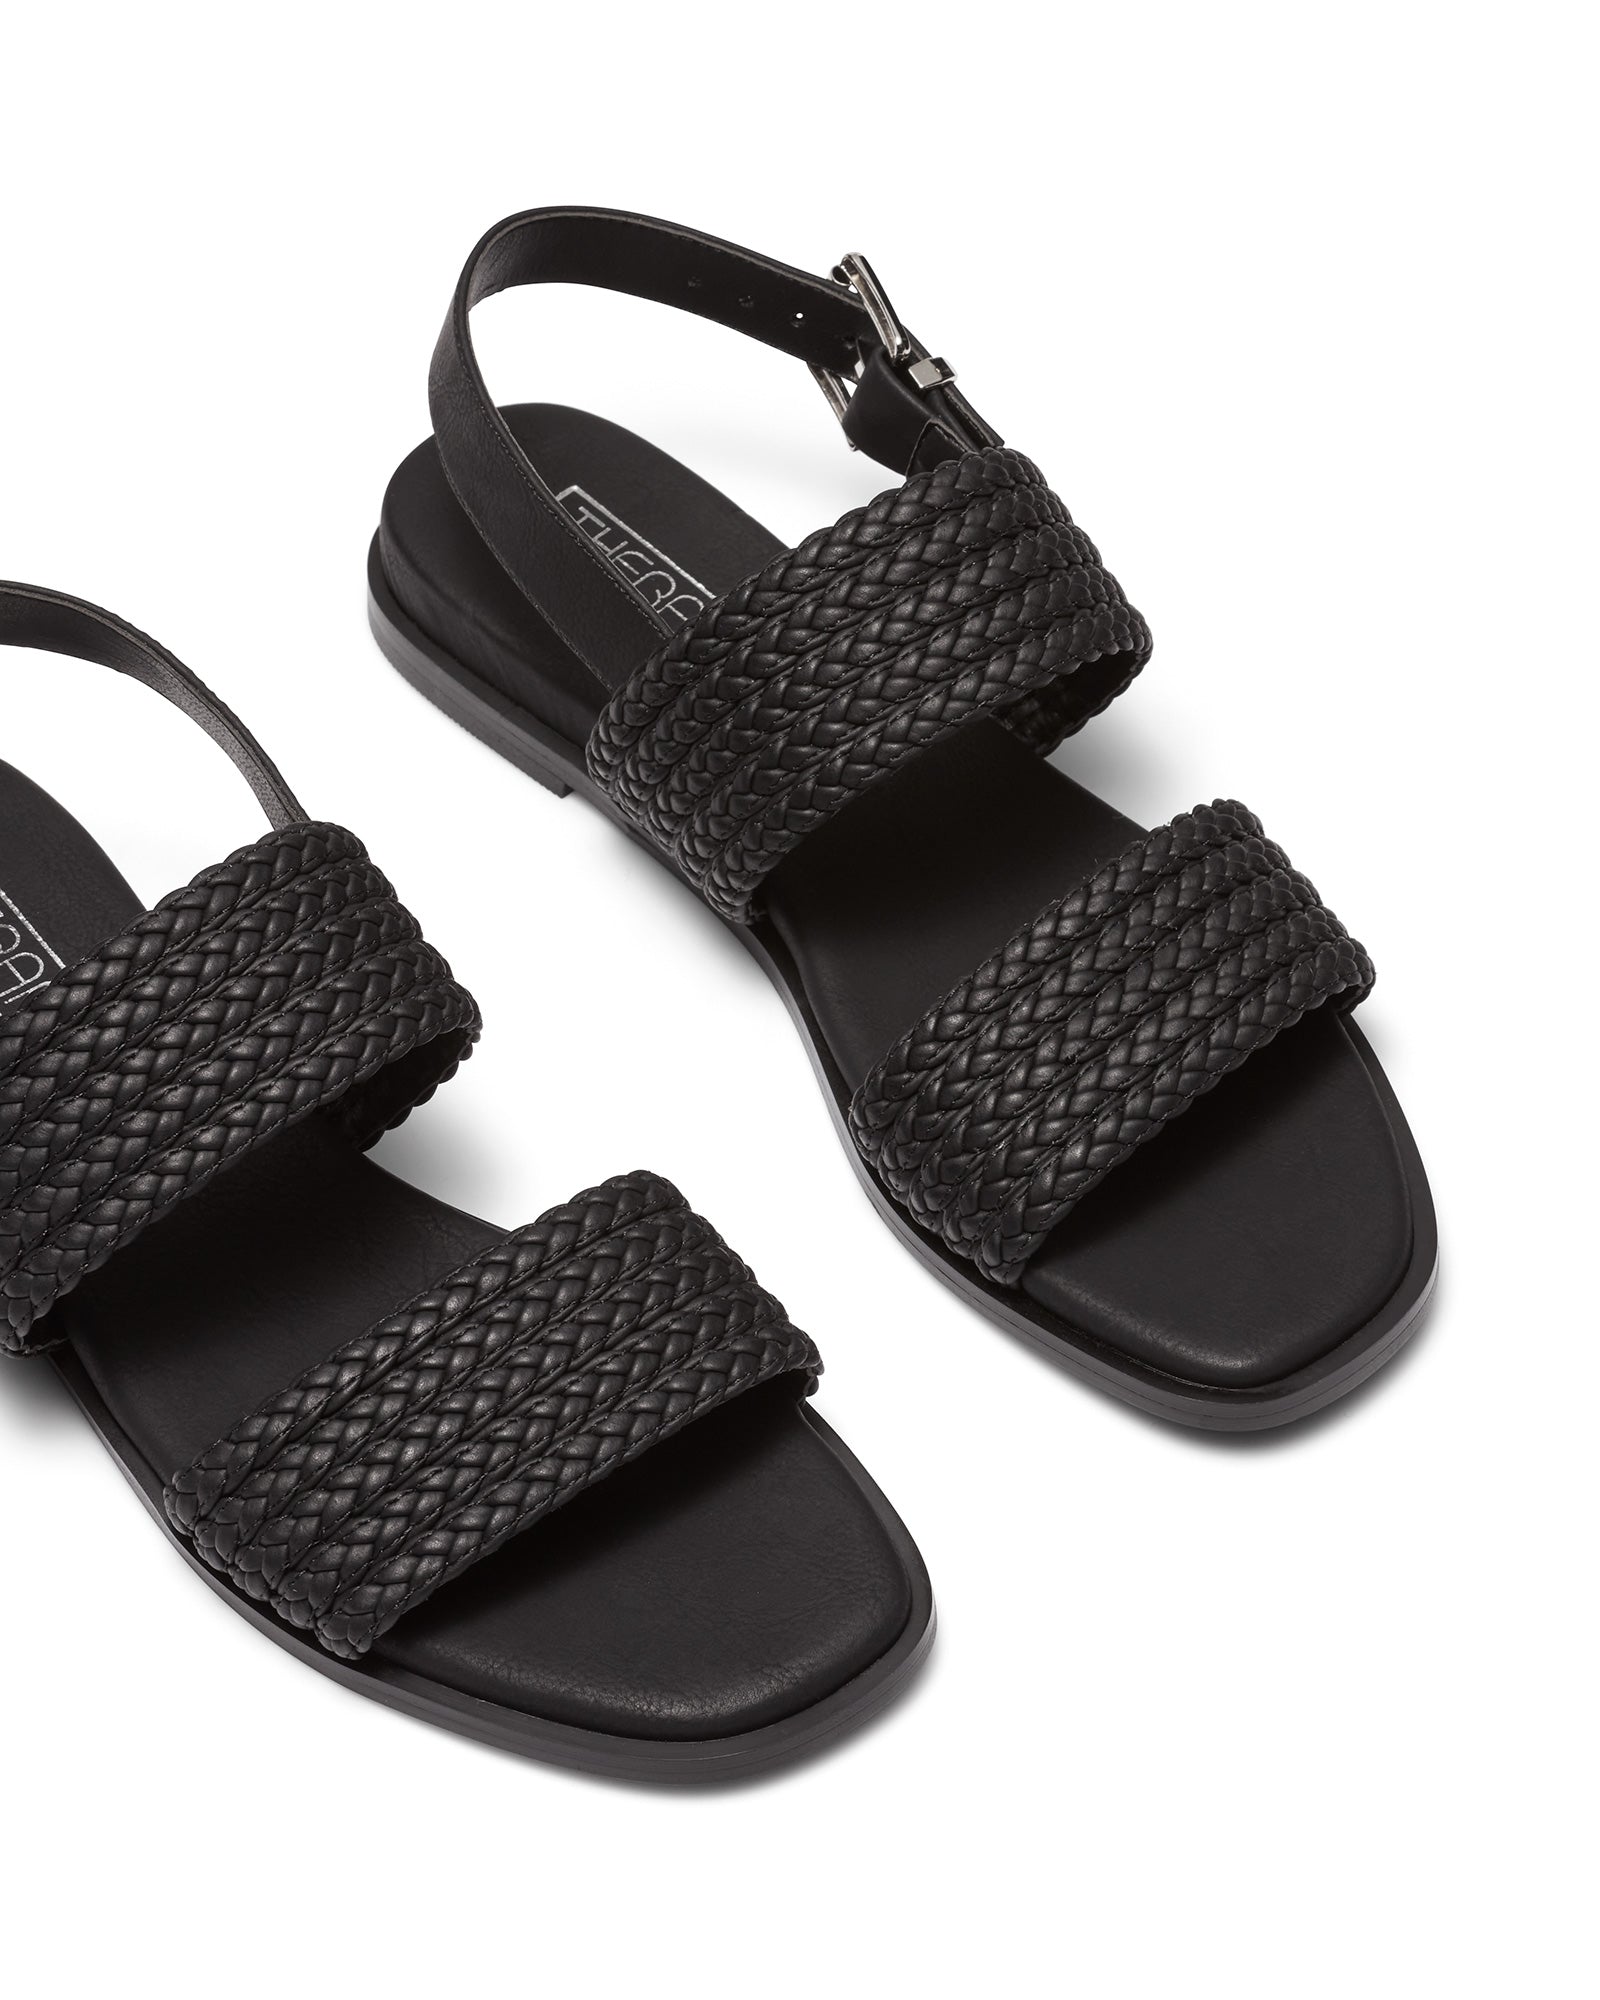 Therapy Shoes Scarlet Black | Women's Sandals | Flats | Woven Strap